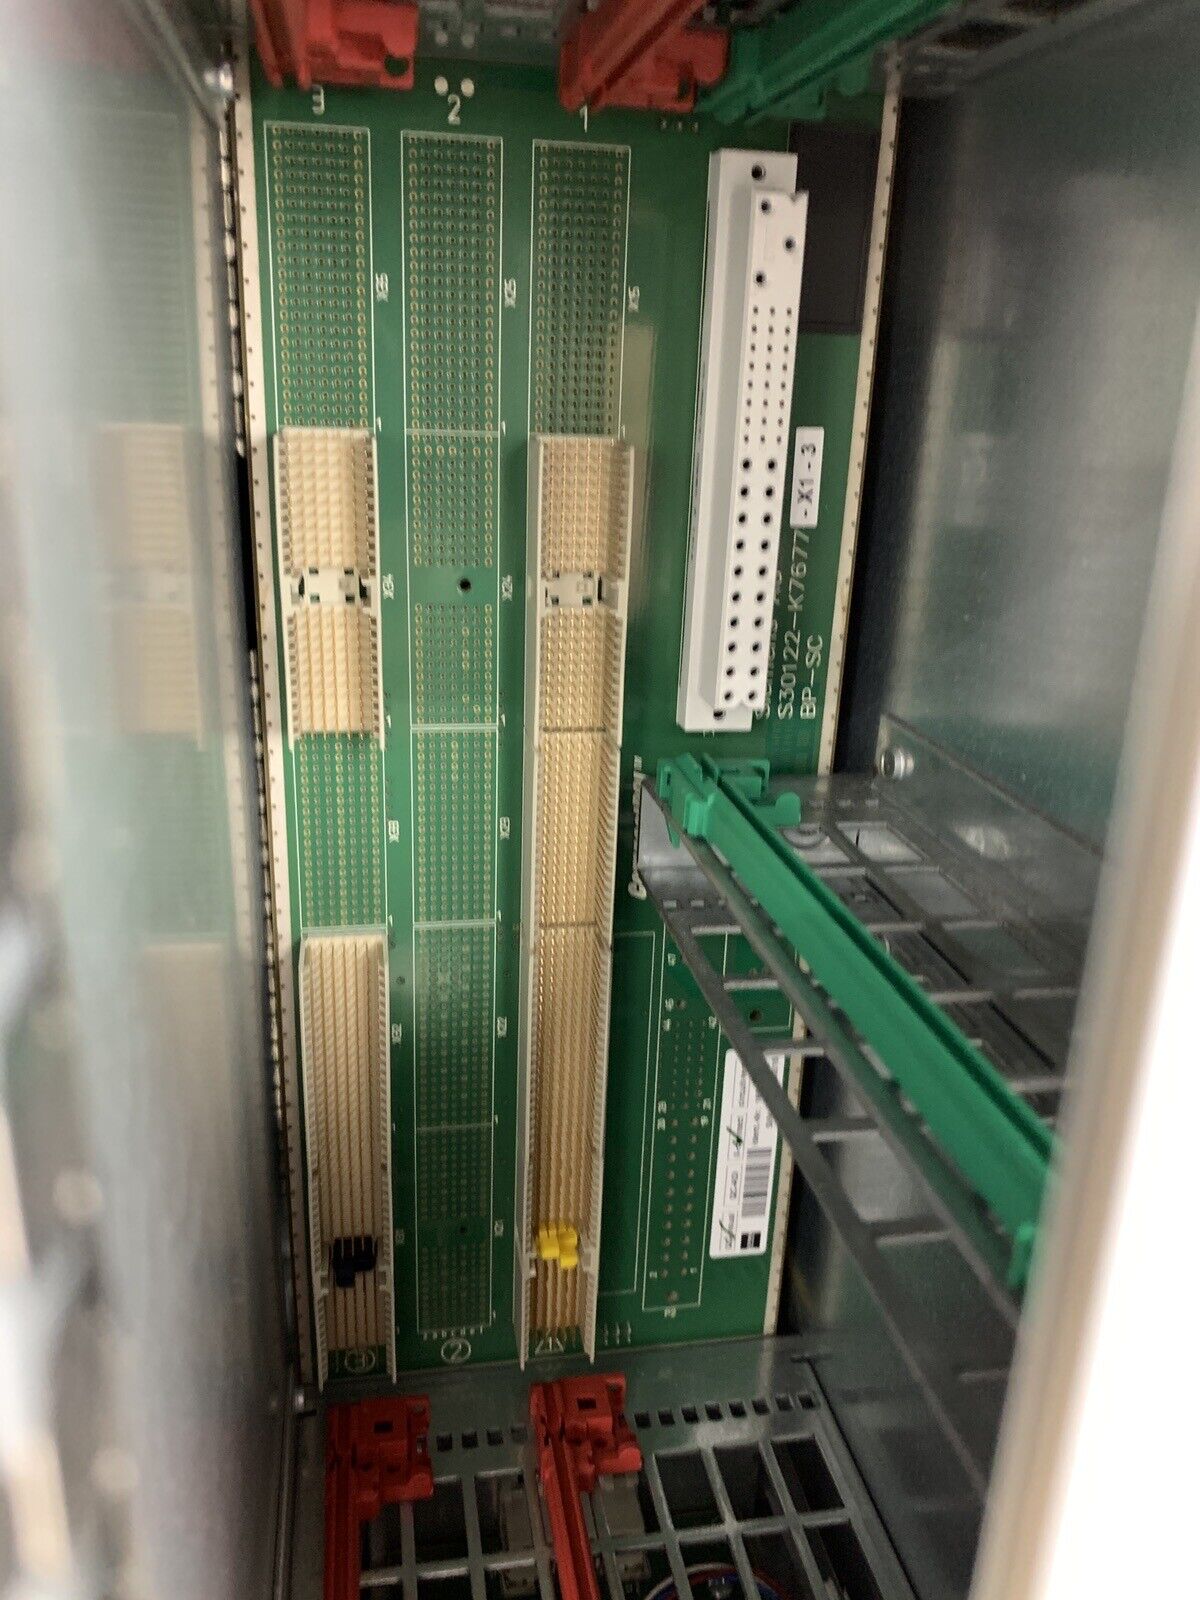 Siemens AP3700 IP Communication Server Expansion Front Opened Chassis